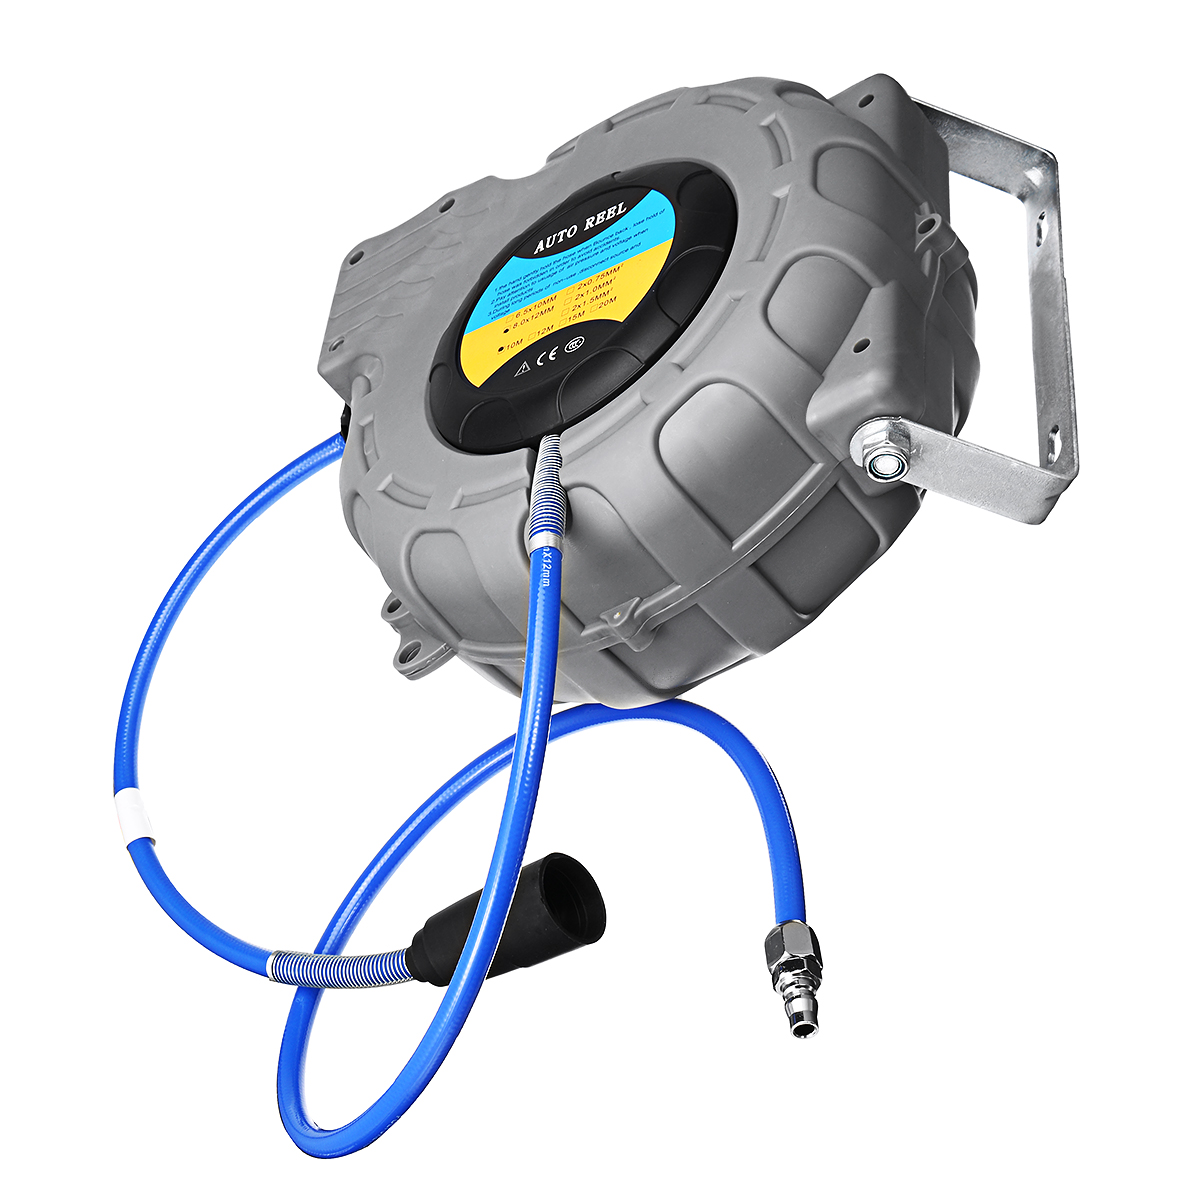 Wall-Mounted-Automatic-Retractable-Garden-Hose-Pipe-Reel-Water-Car-Cleaning-Tool-1500193